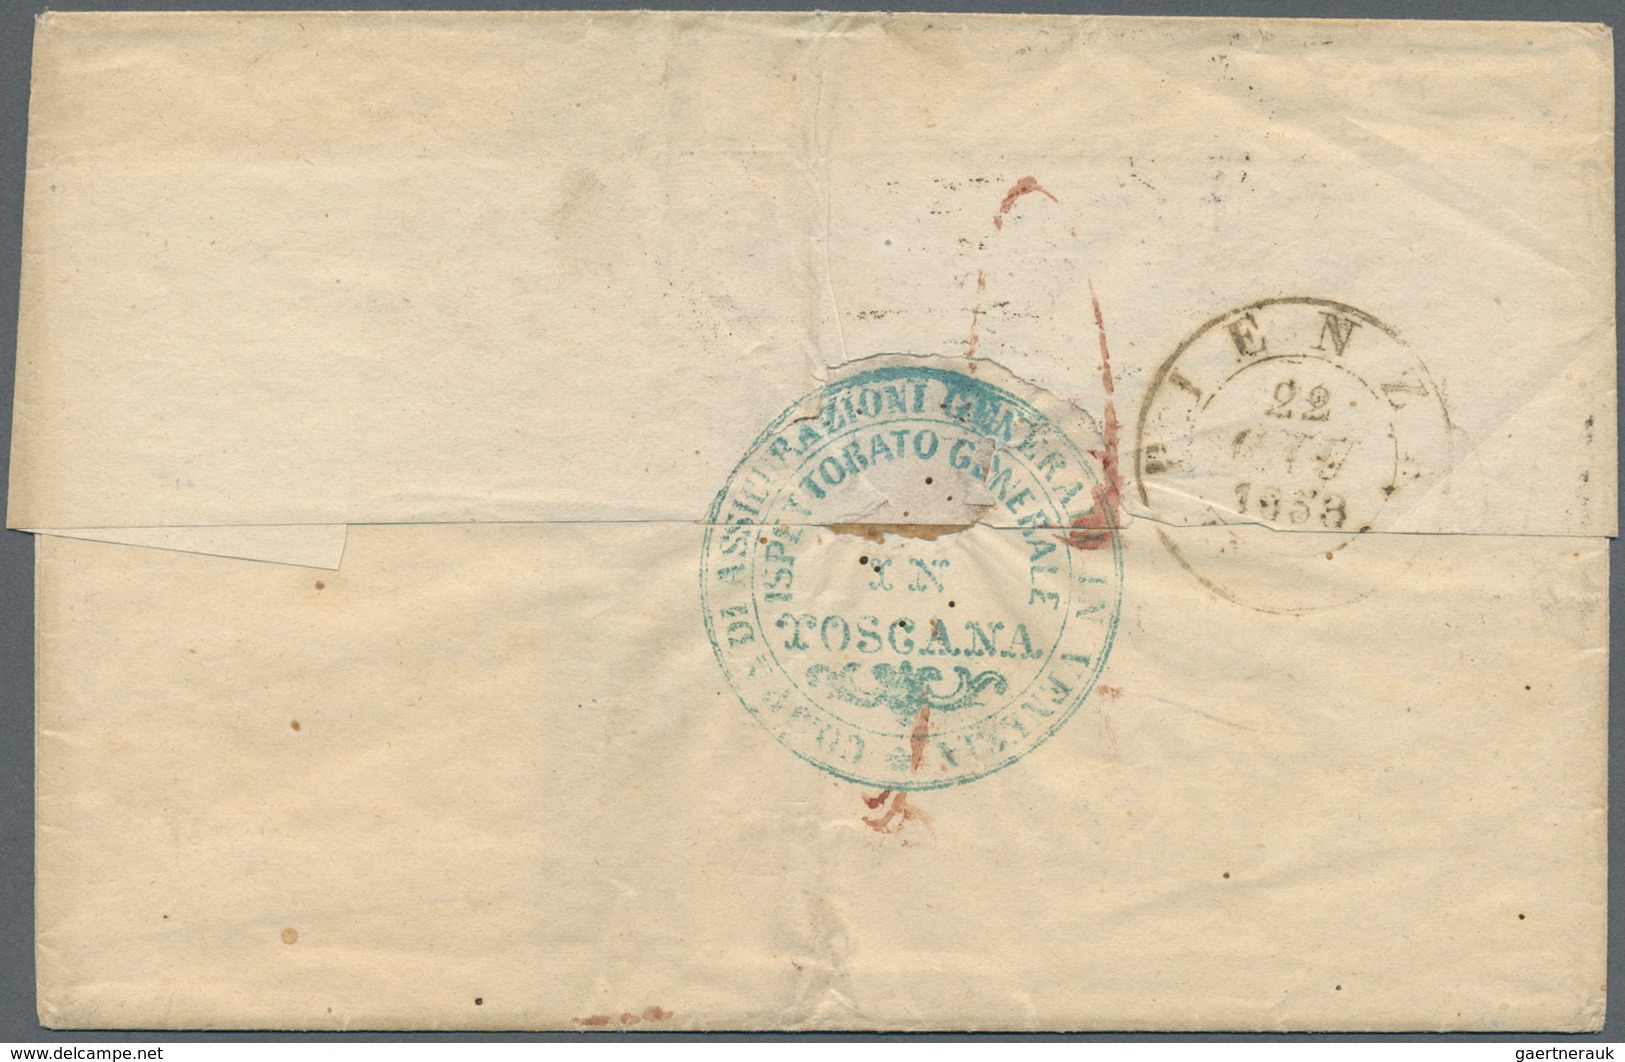 Italien - Altitalienische Staaten: Toscana: 1853, 1cr. Carmine Red And 2cr. Dull Blue On Folded Enve - Tuscany